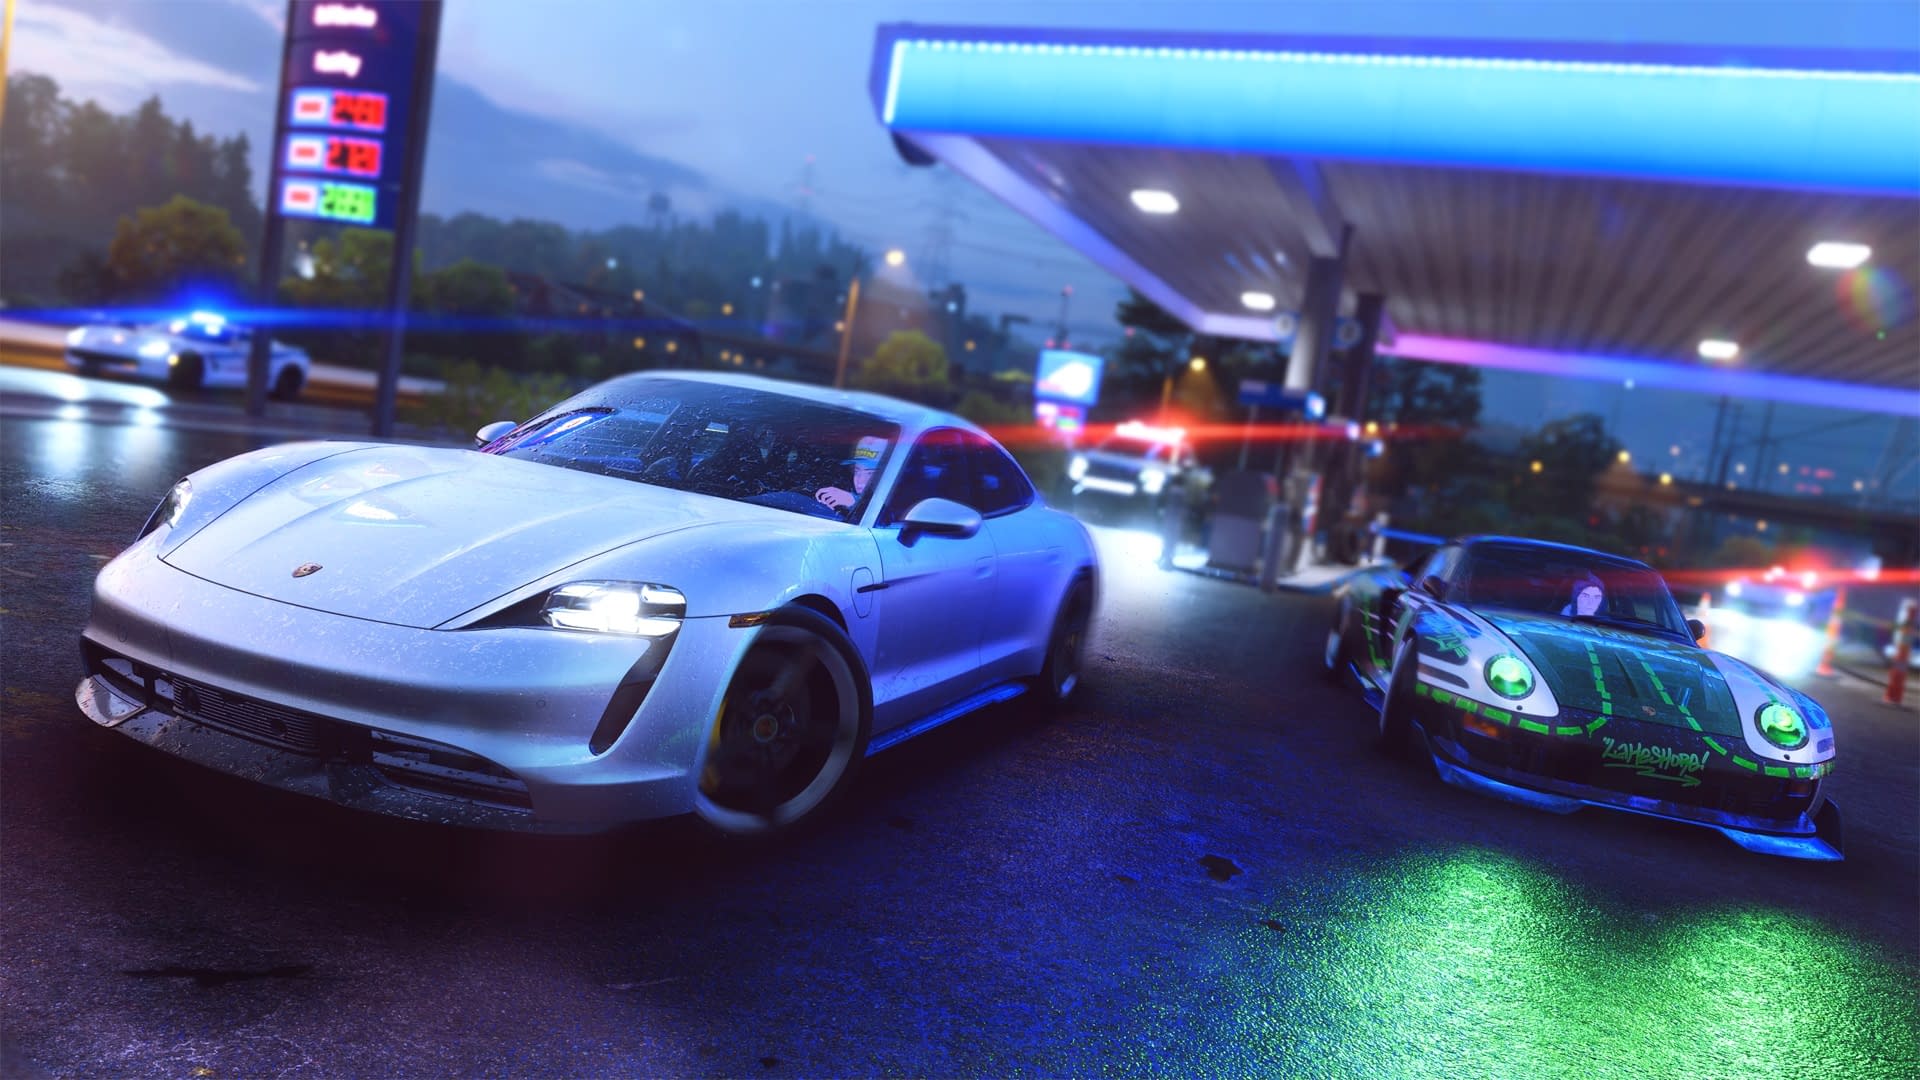 EA Play and EA Play Pro members can play Need for Speed Unbound